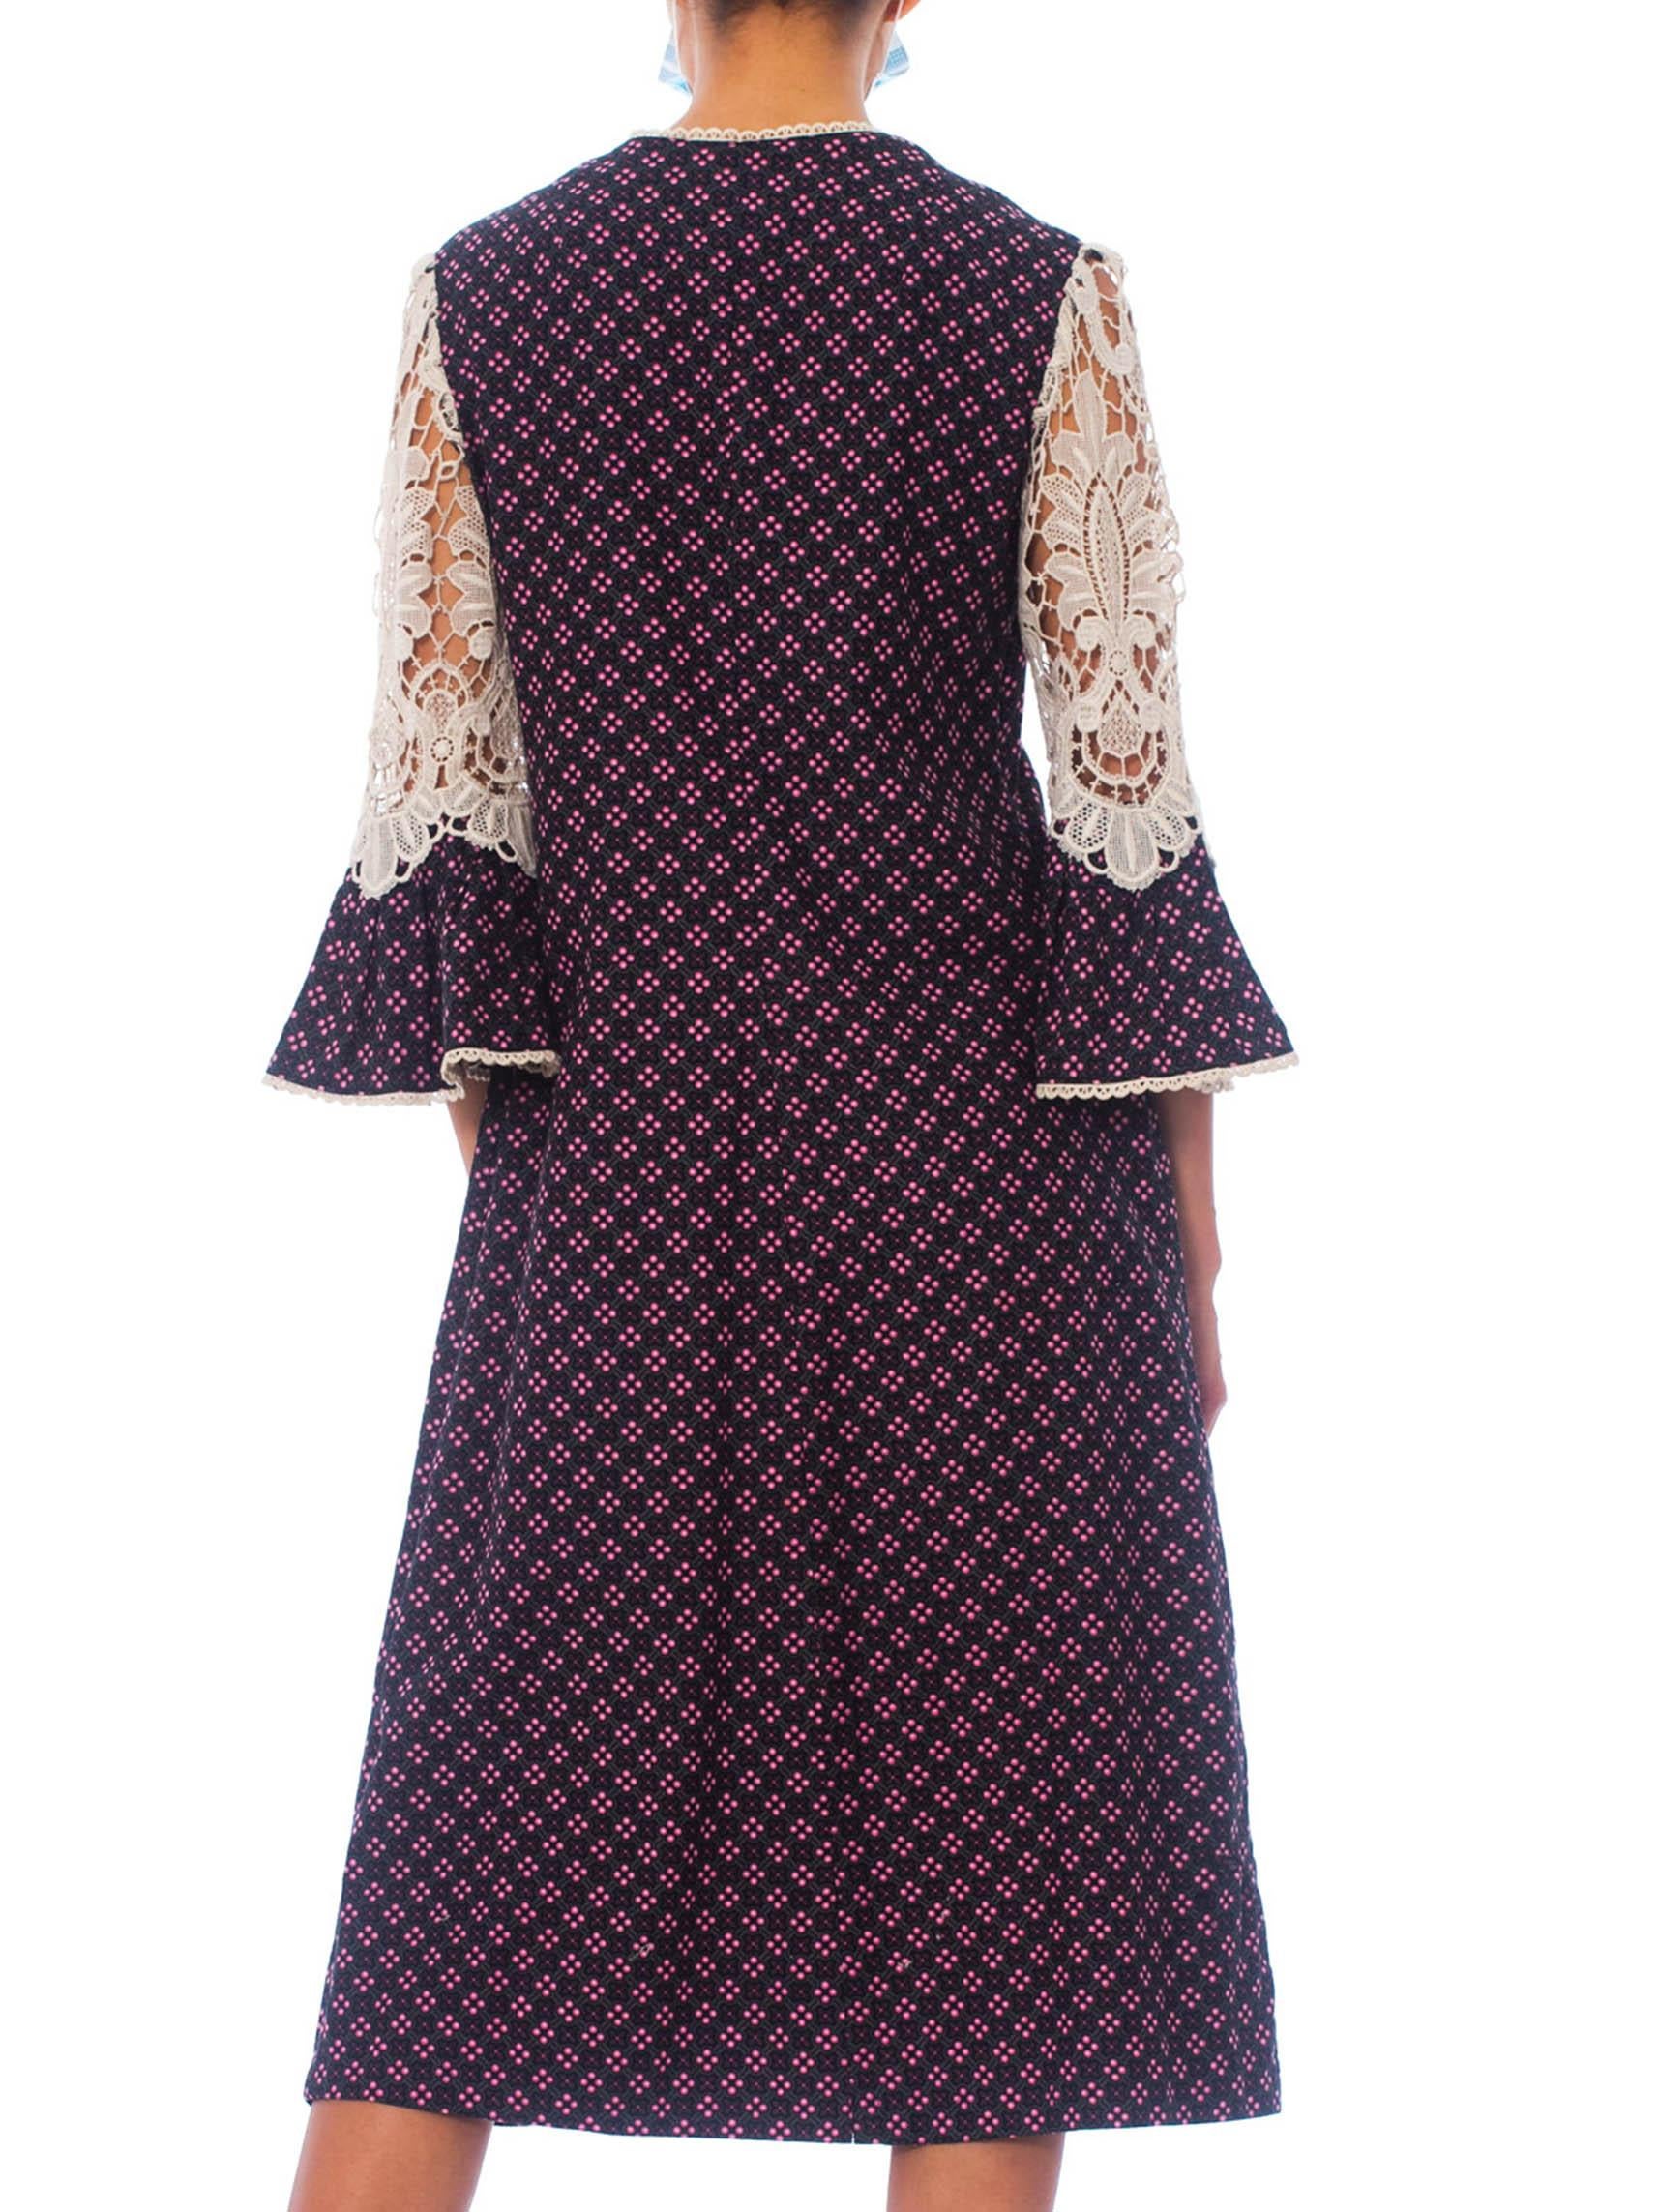 1960S Floral Printed Cotton Twill Victorian Revival Dress With White Lace Sleev For Sale 2